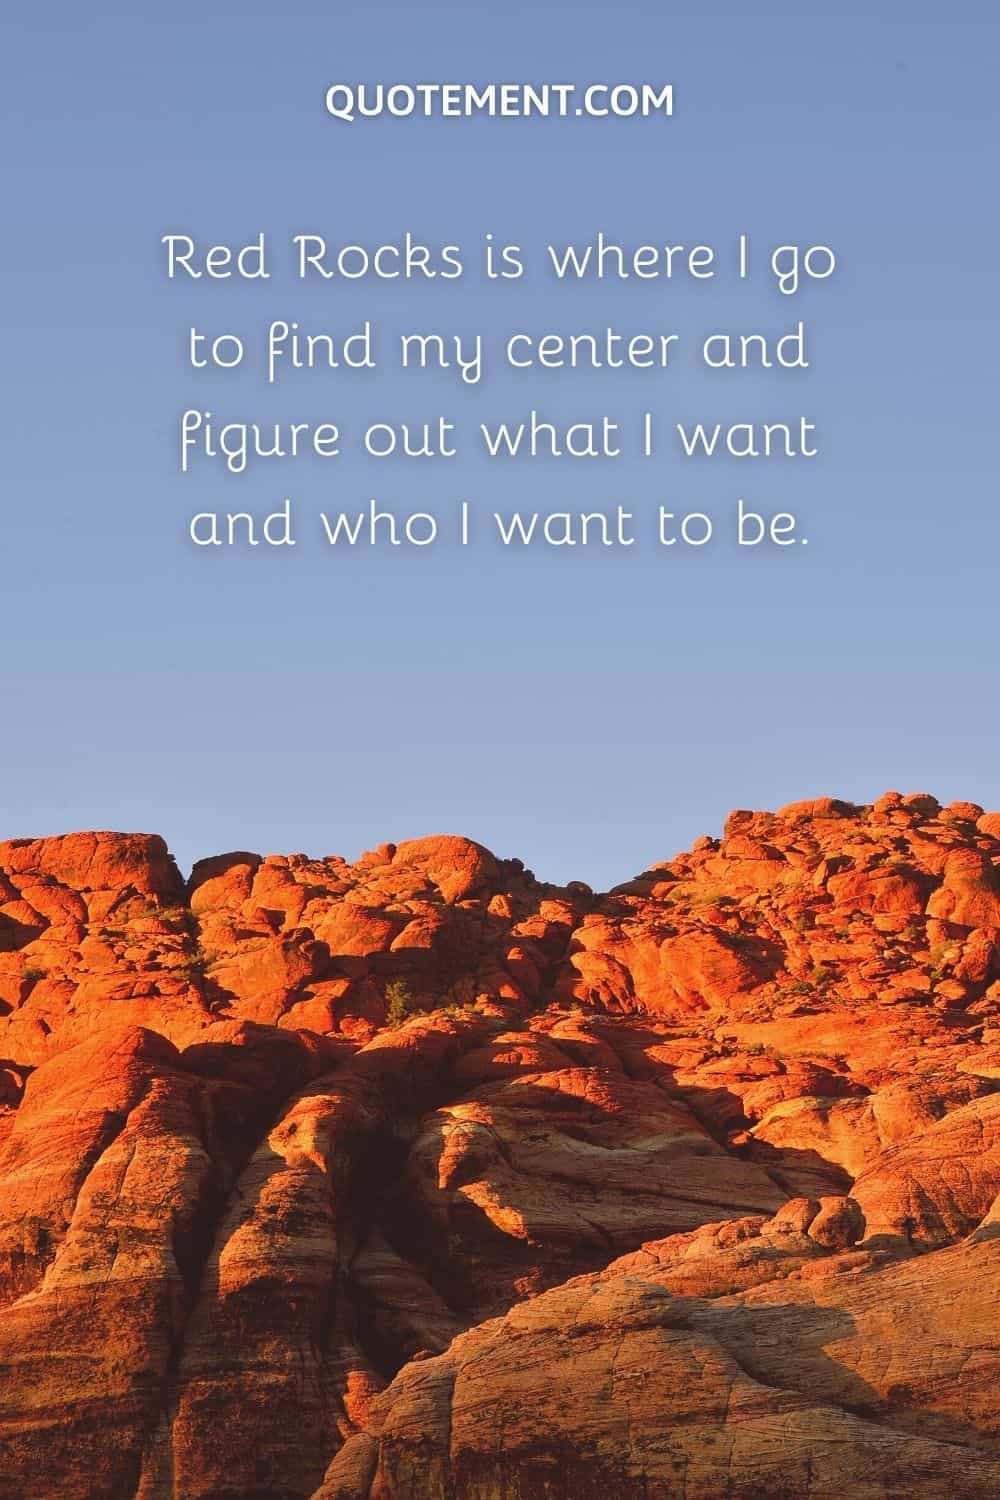 Red Rocks is where I go to find my center and figure out what I want and who I want to be.